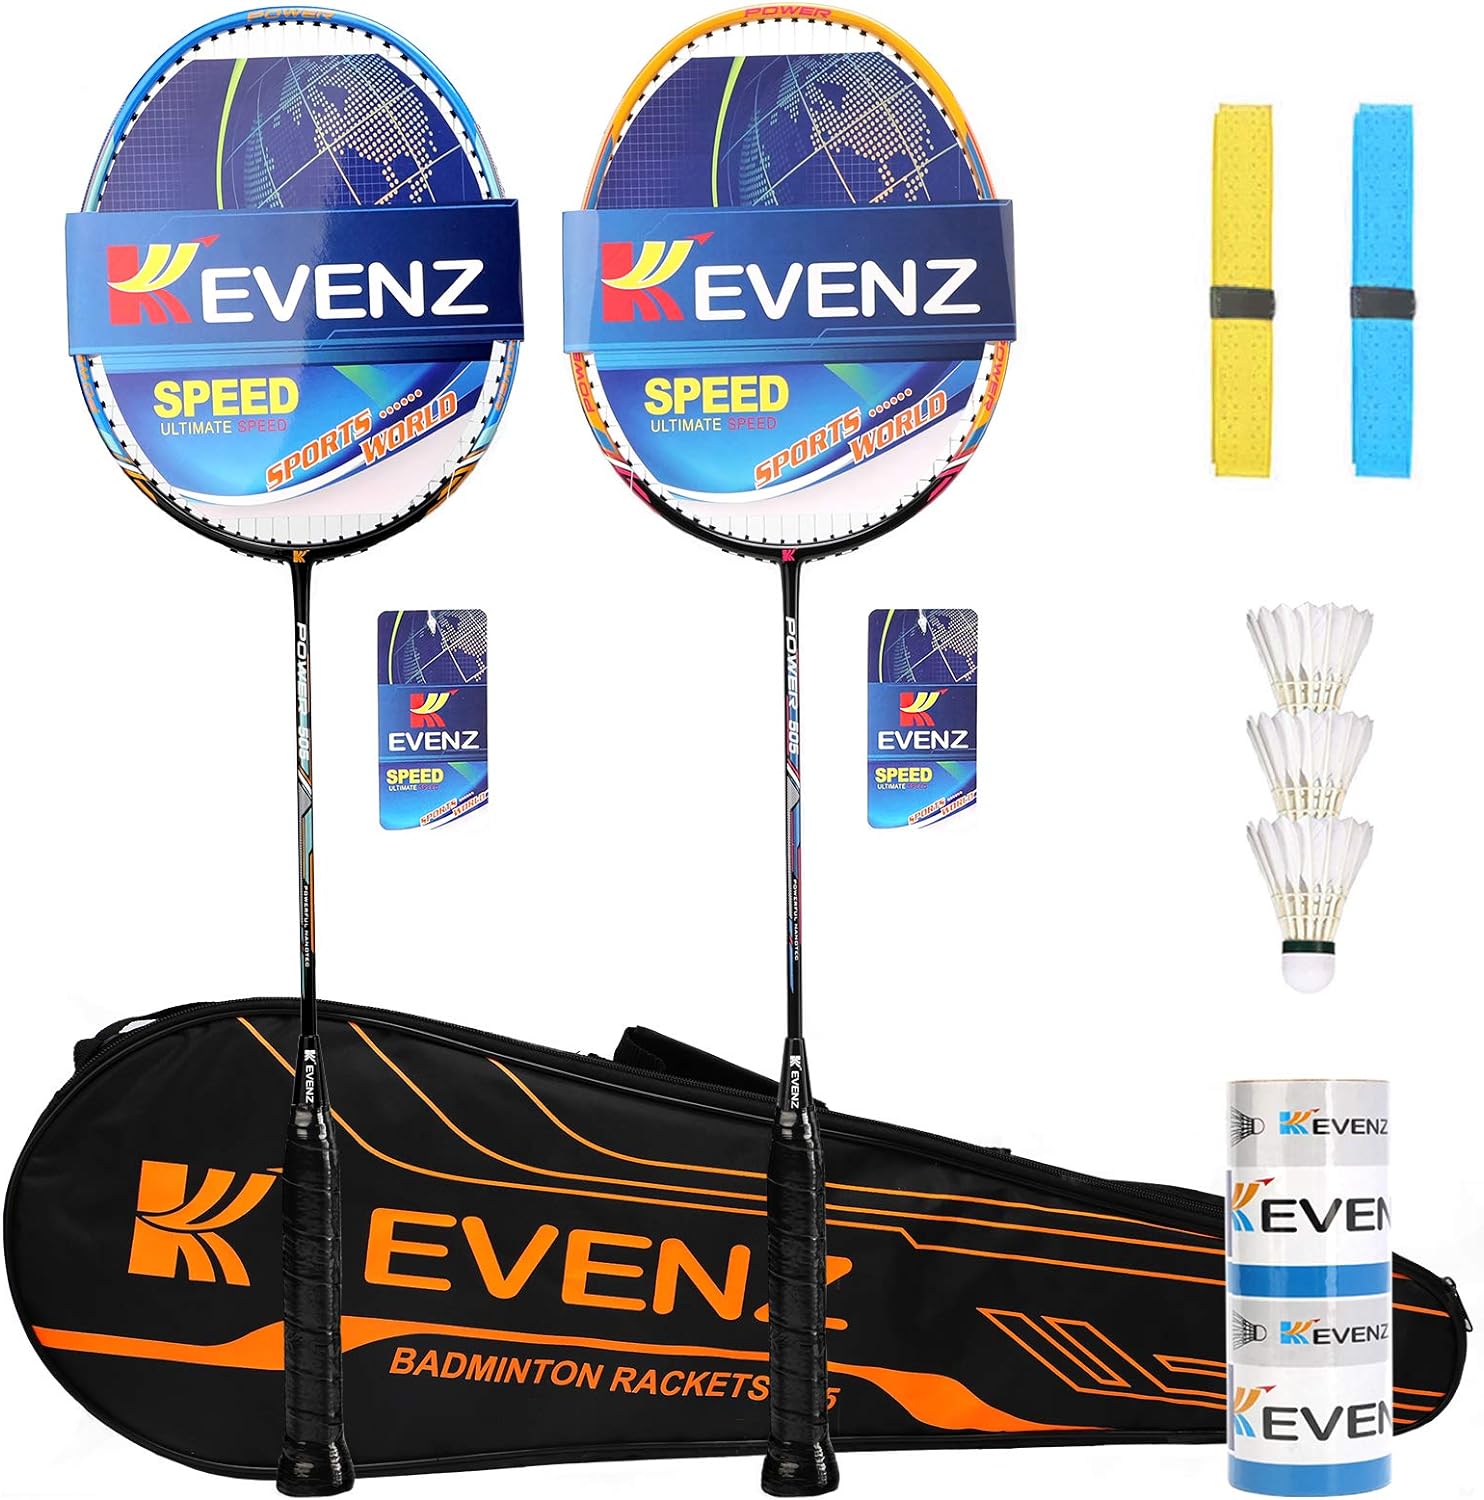 We really liked these rackets! They are very light-weight, super high quality and easy to handle. We have been enjoying to play with them since the day they arrived. The birdies are also very nice. We highly recommend these to anyone who enjoys to play badminton.